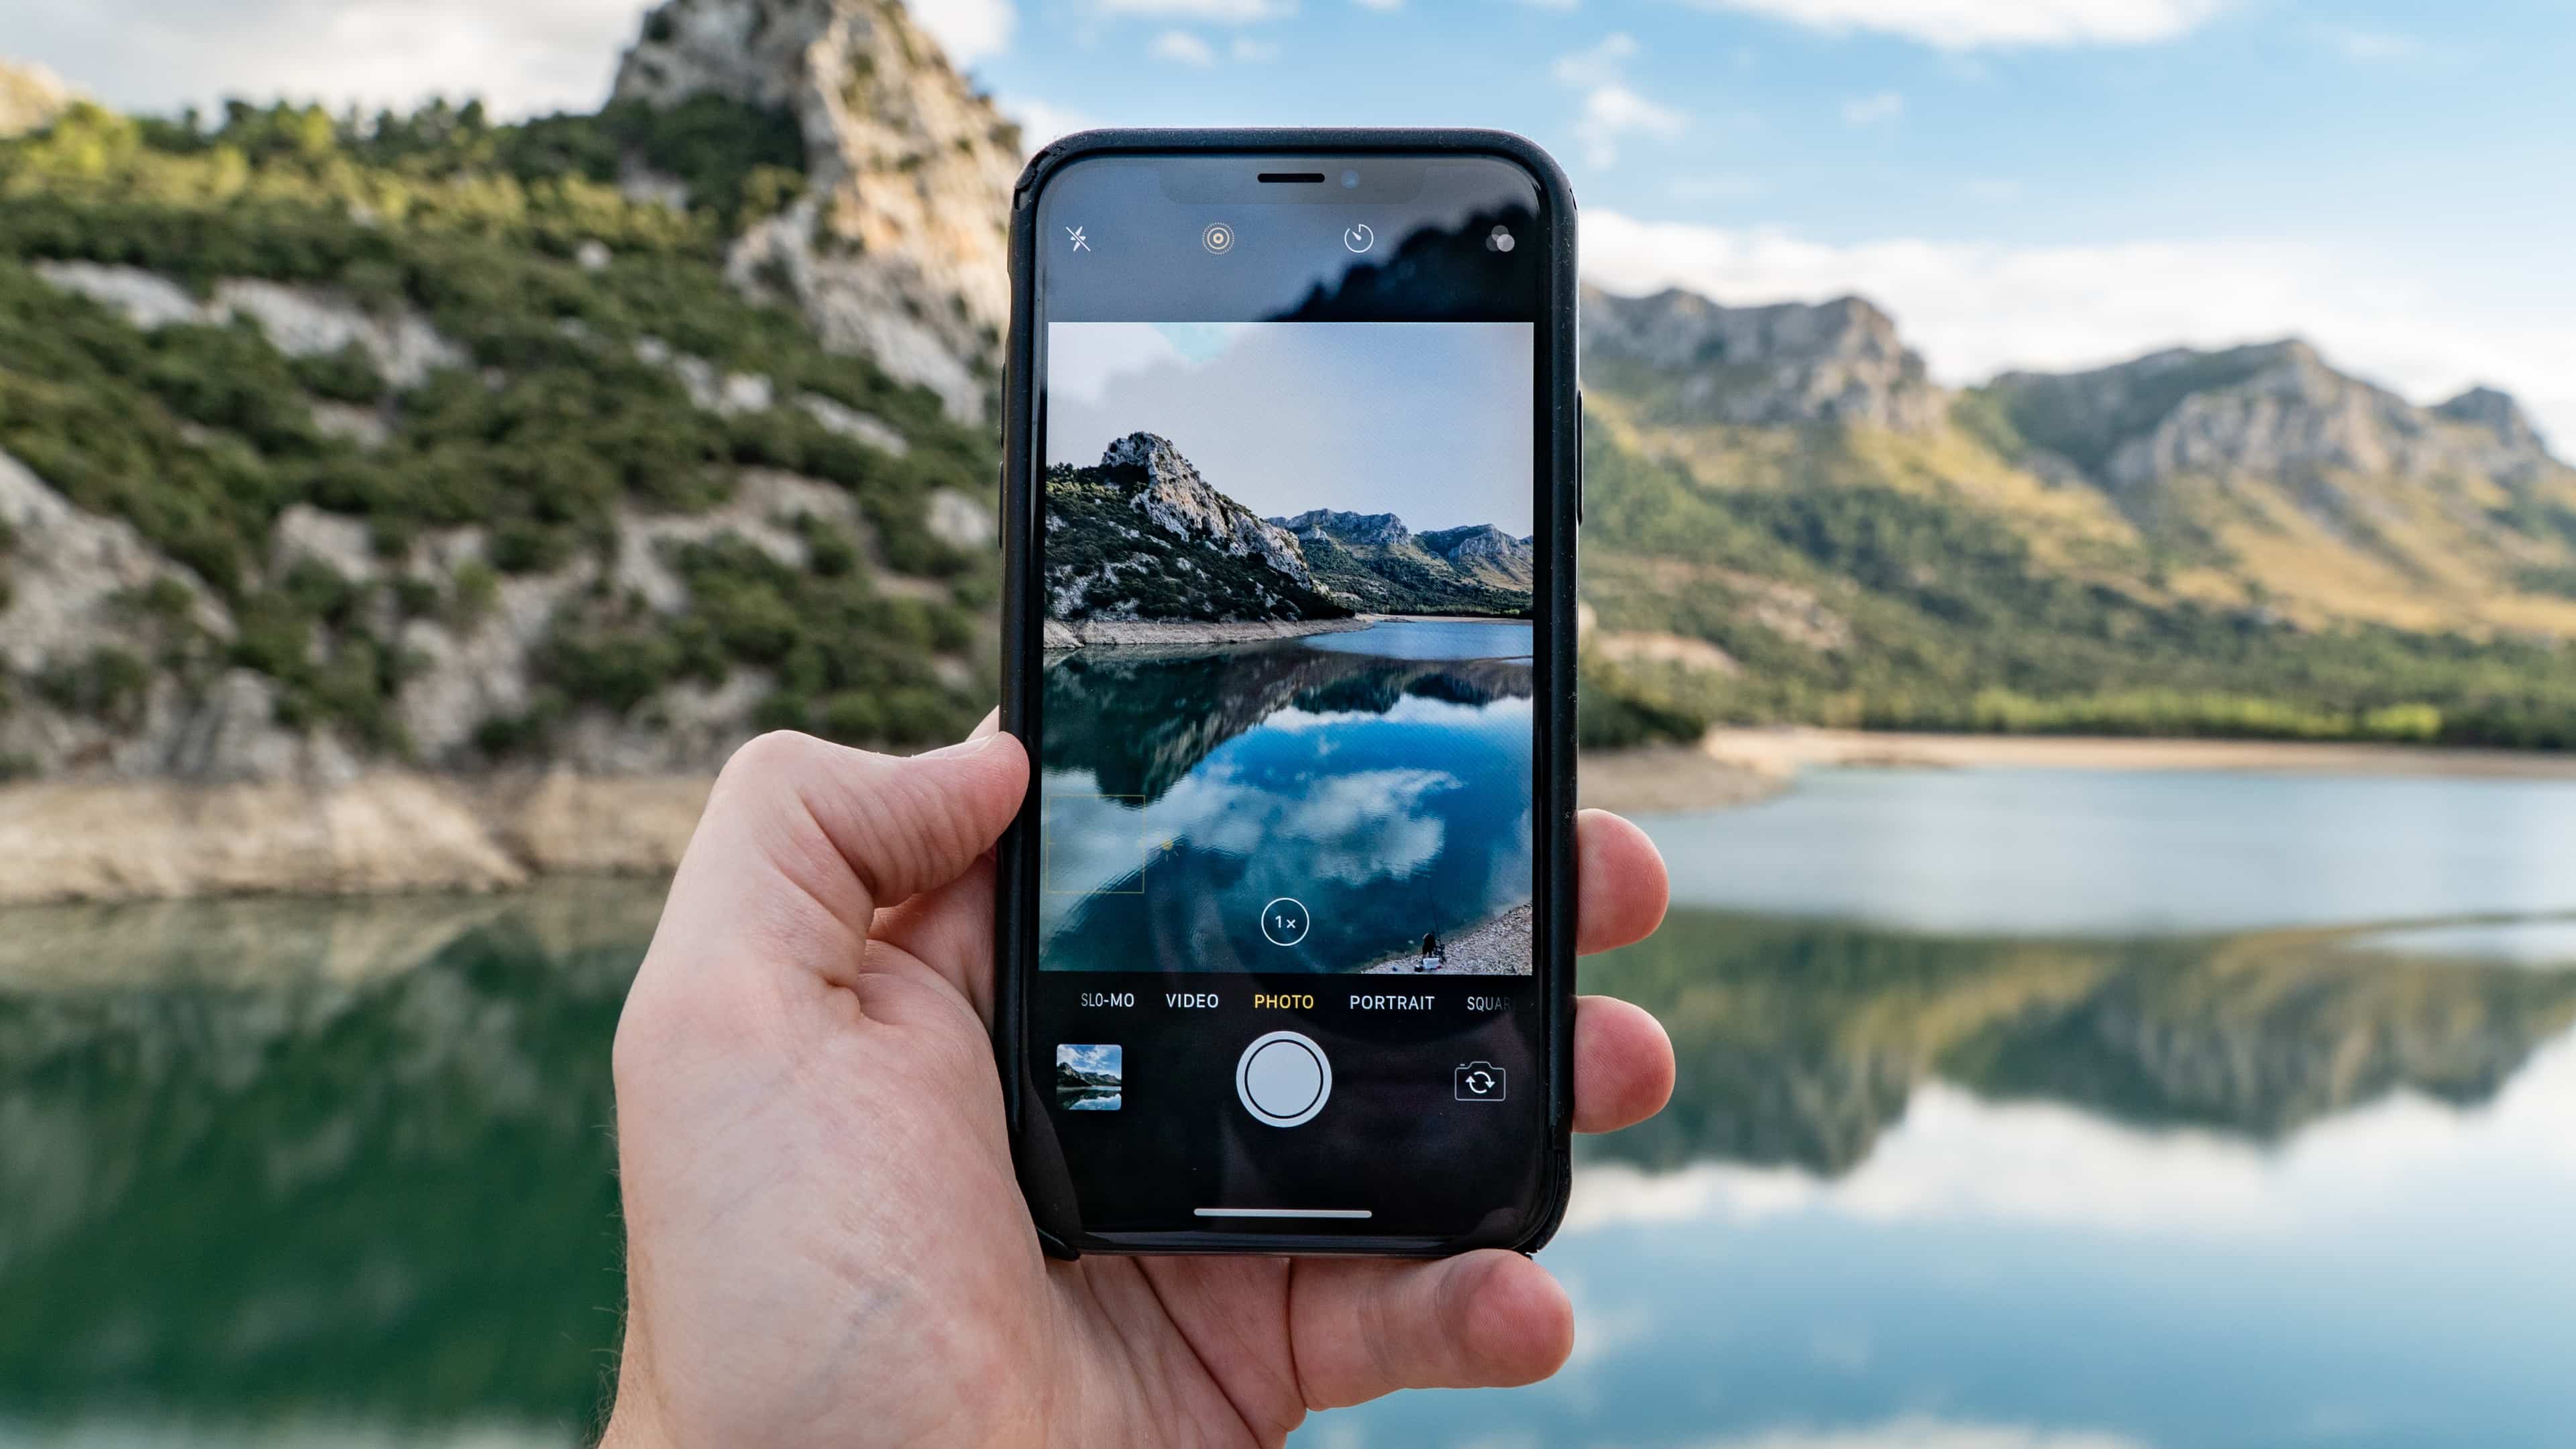 iPhone held in hand, with a scenic landscape capture with the Camera app